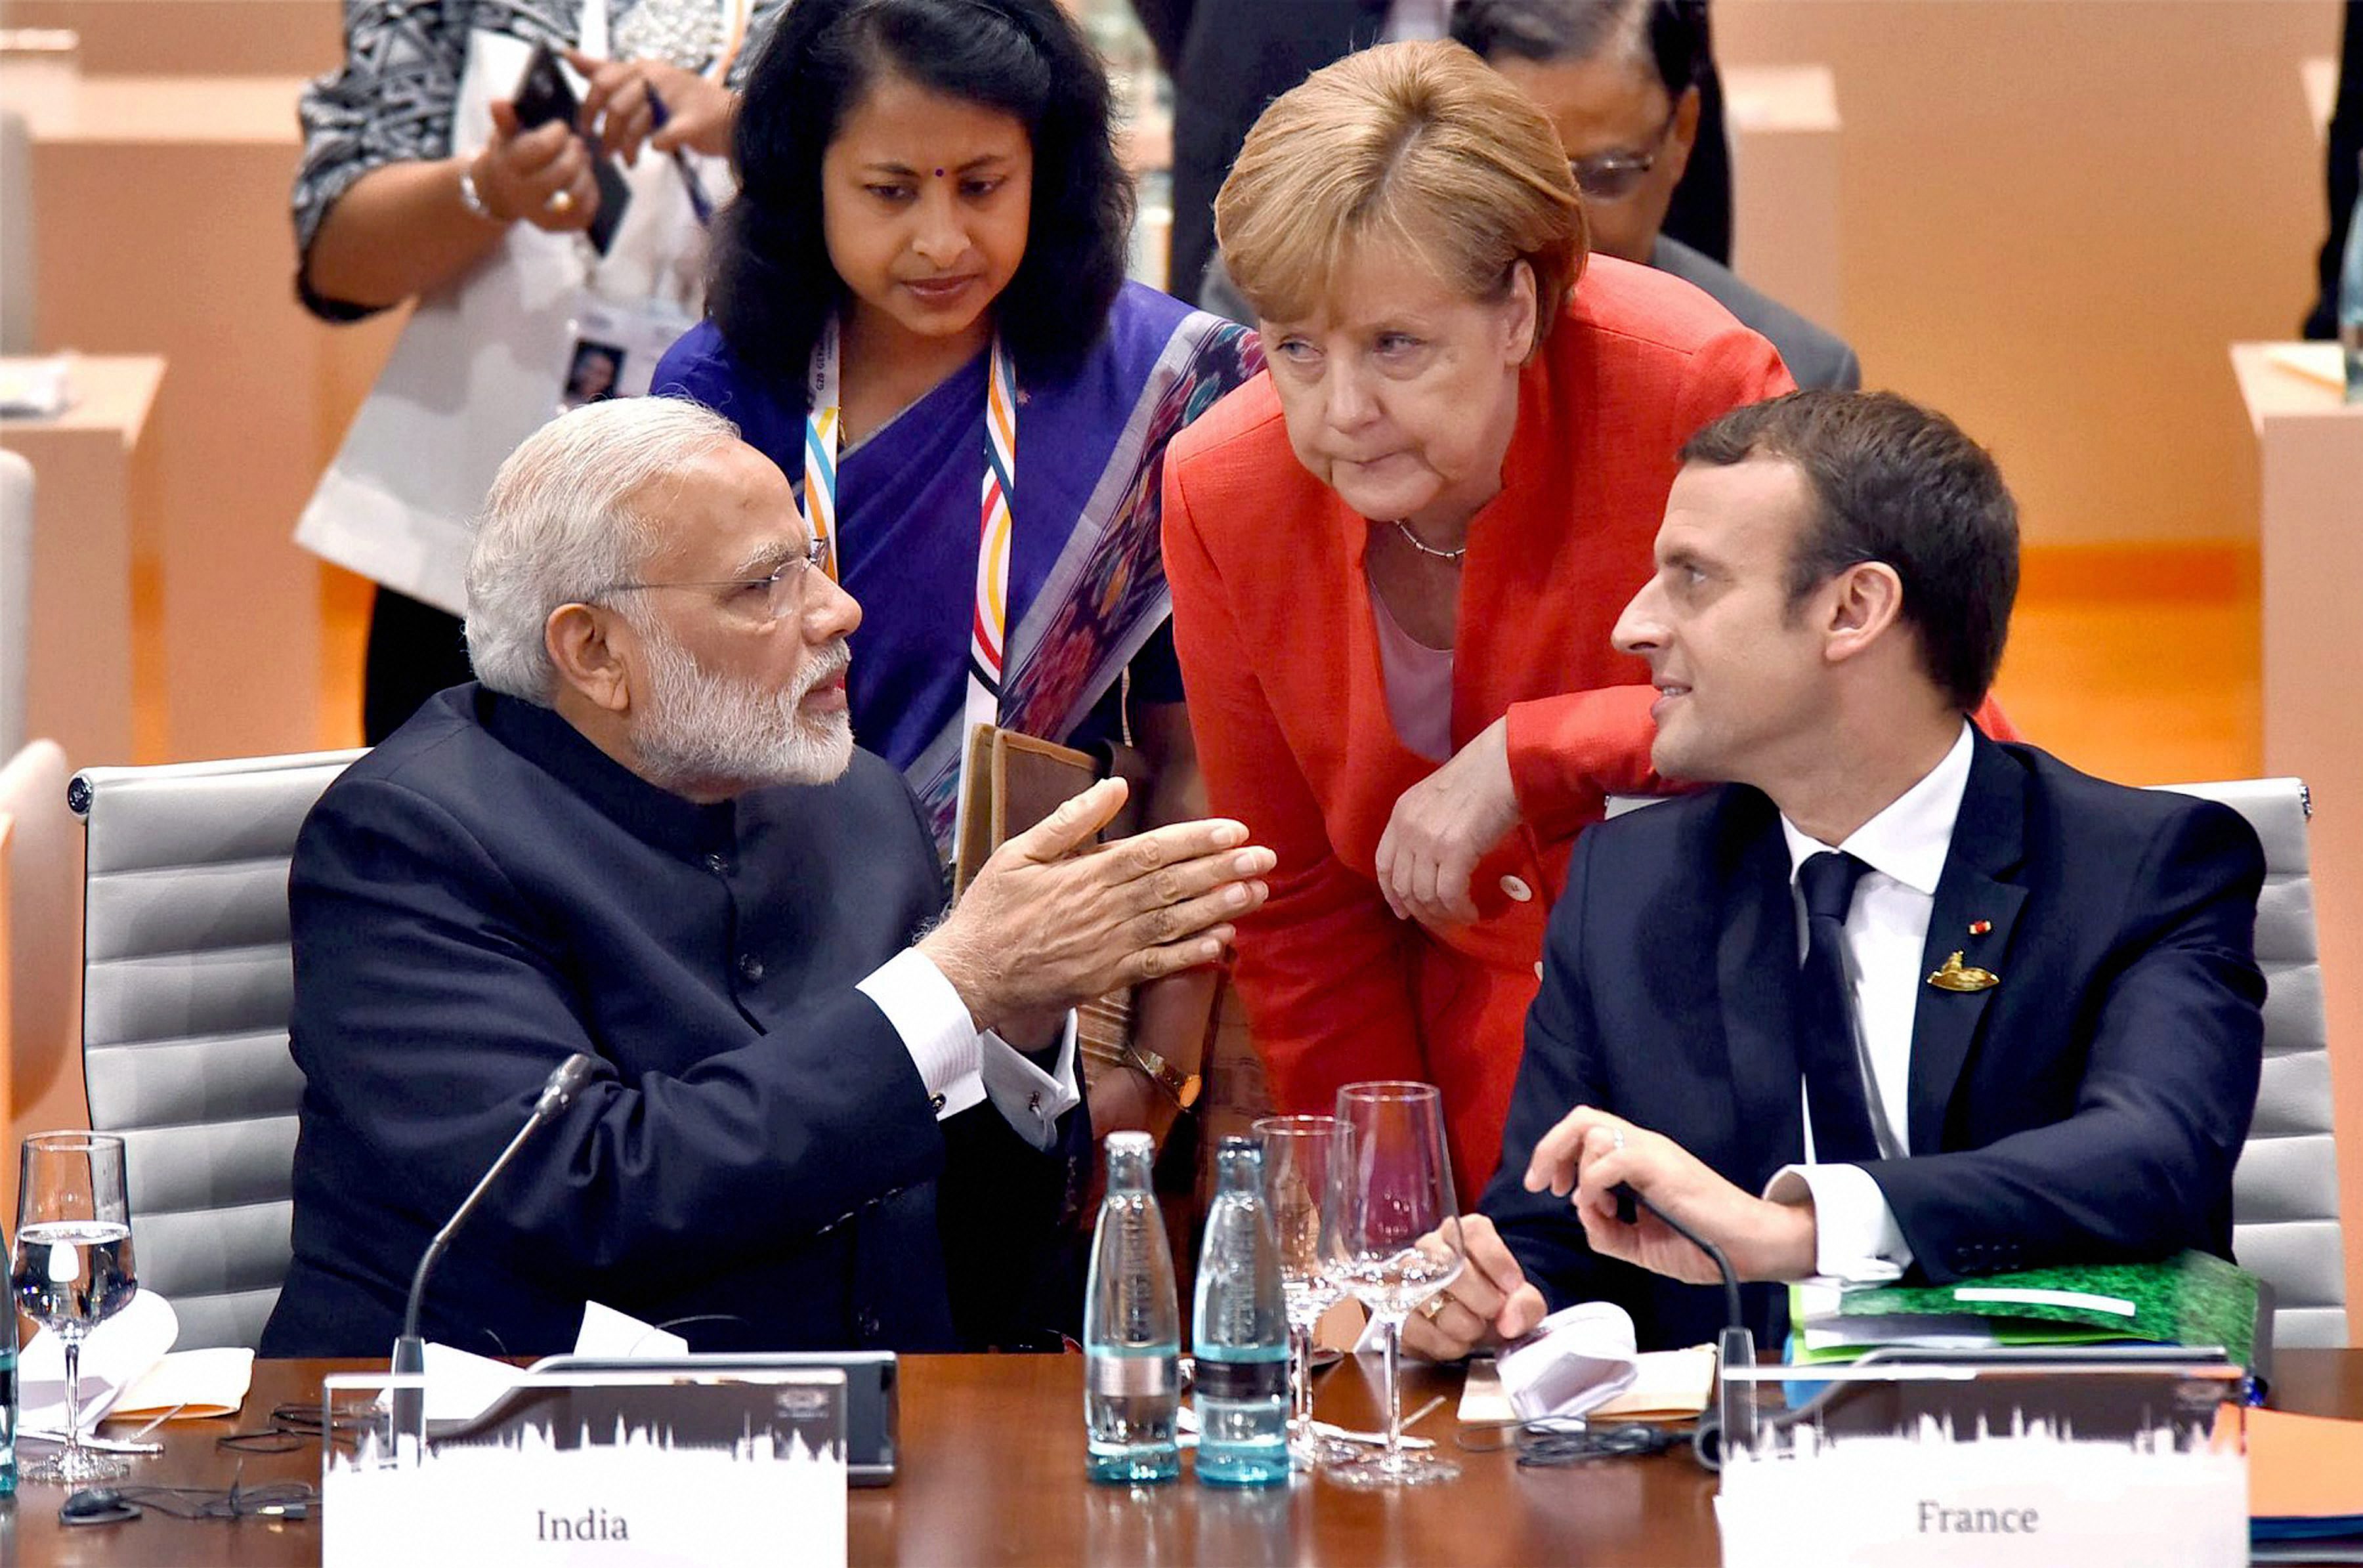 Modi asks G20 leaders to focus on workers